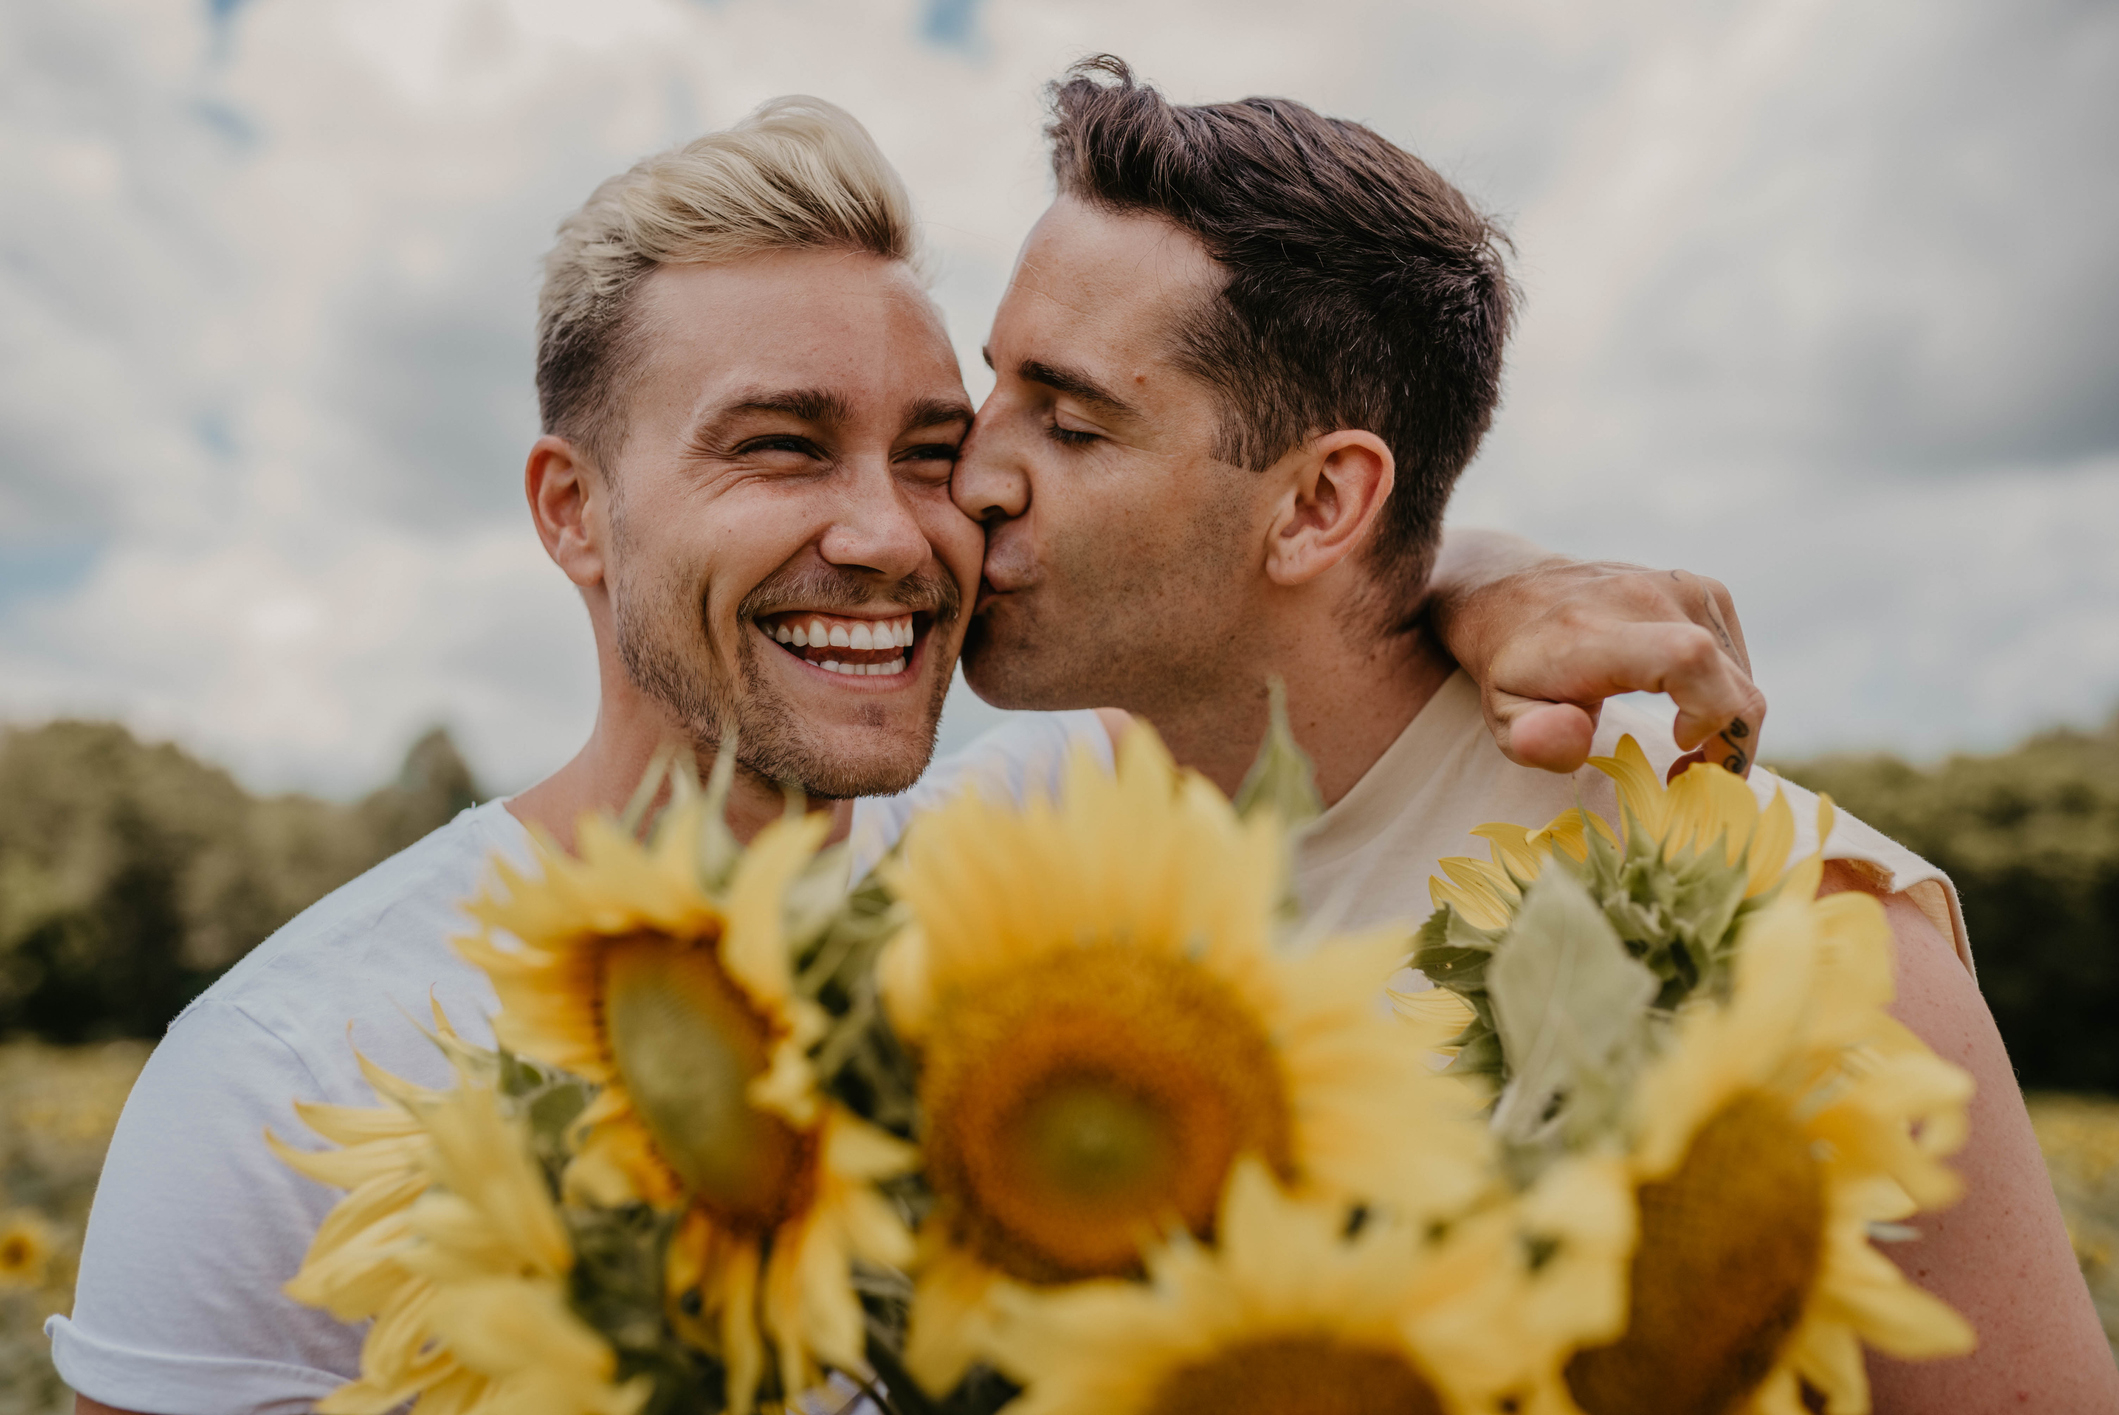 A happy-looking couple is holding a bouquet of sunflowers